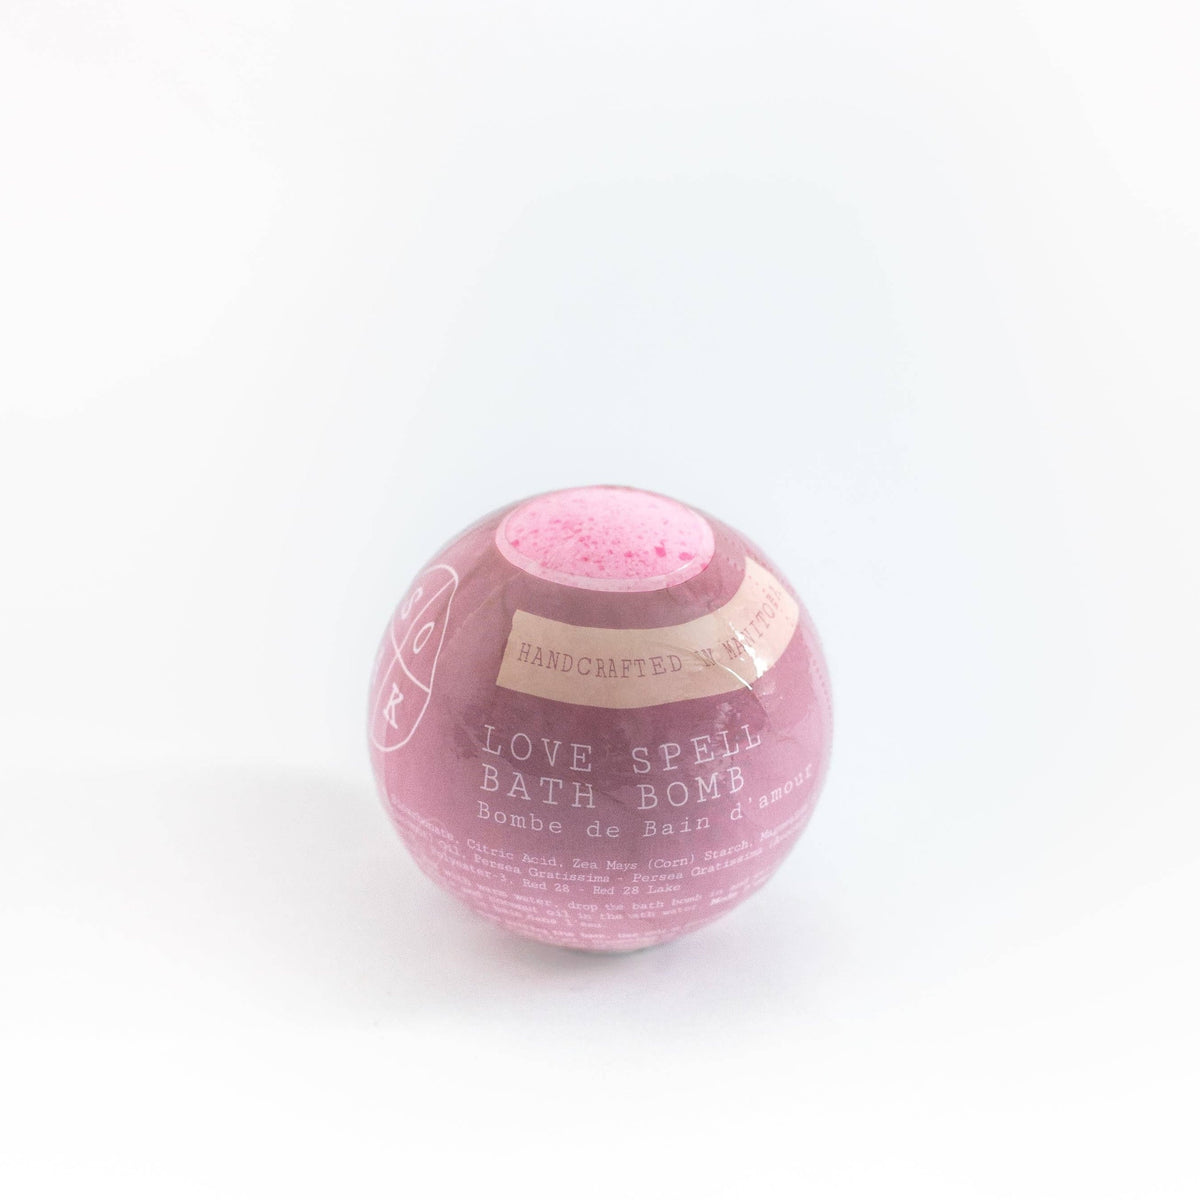 A pink, spherical bath bomb labeled "SOAK Bath Co. - Love Spell Bath Bomb" in elegant text, placed against a white background.